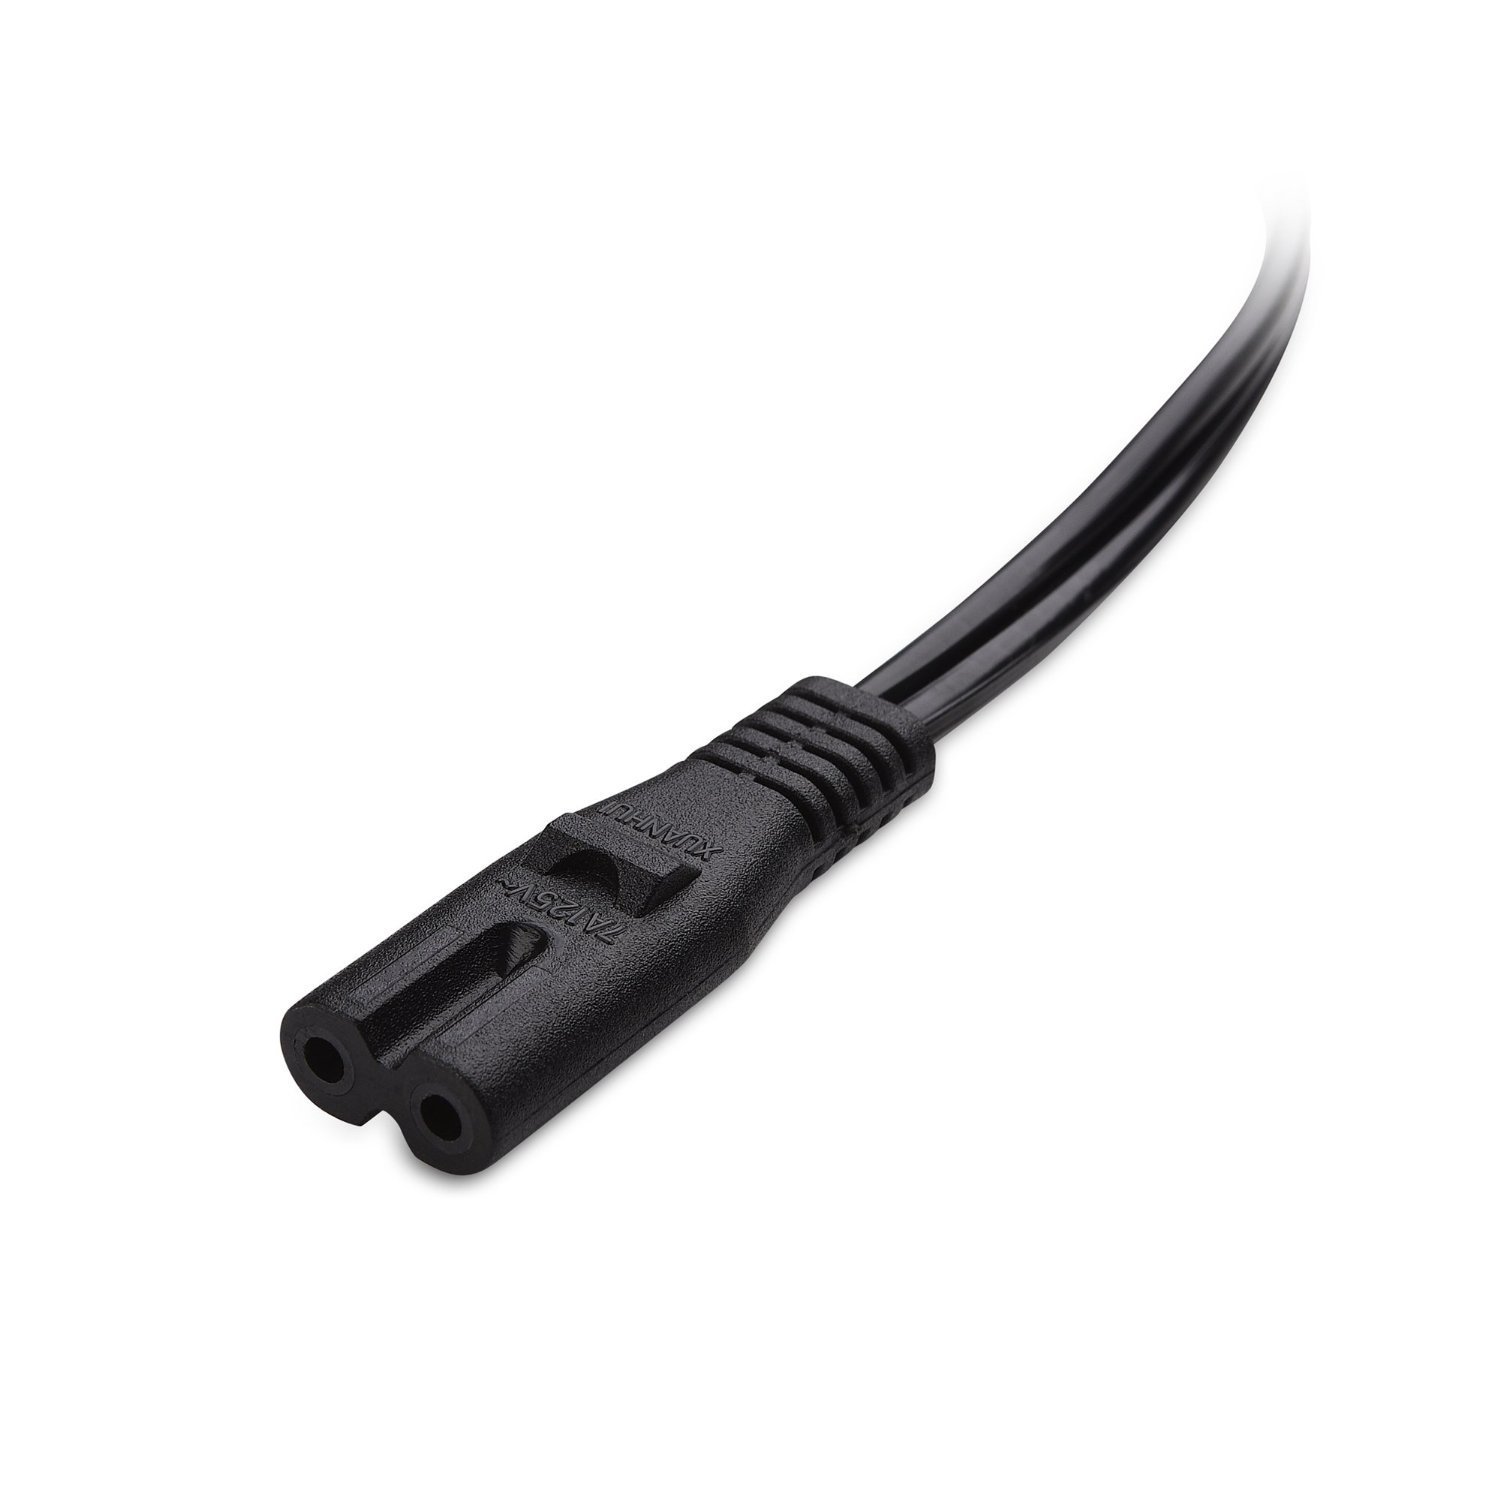 OMNIHIL 10 Foot Long AC Power Cord for Yamaha MusicCast WX-010 Wireless Speaker with Bluetooth (Black) - image 2 of 4